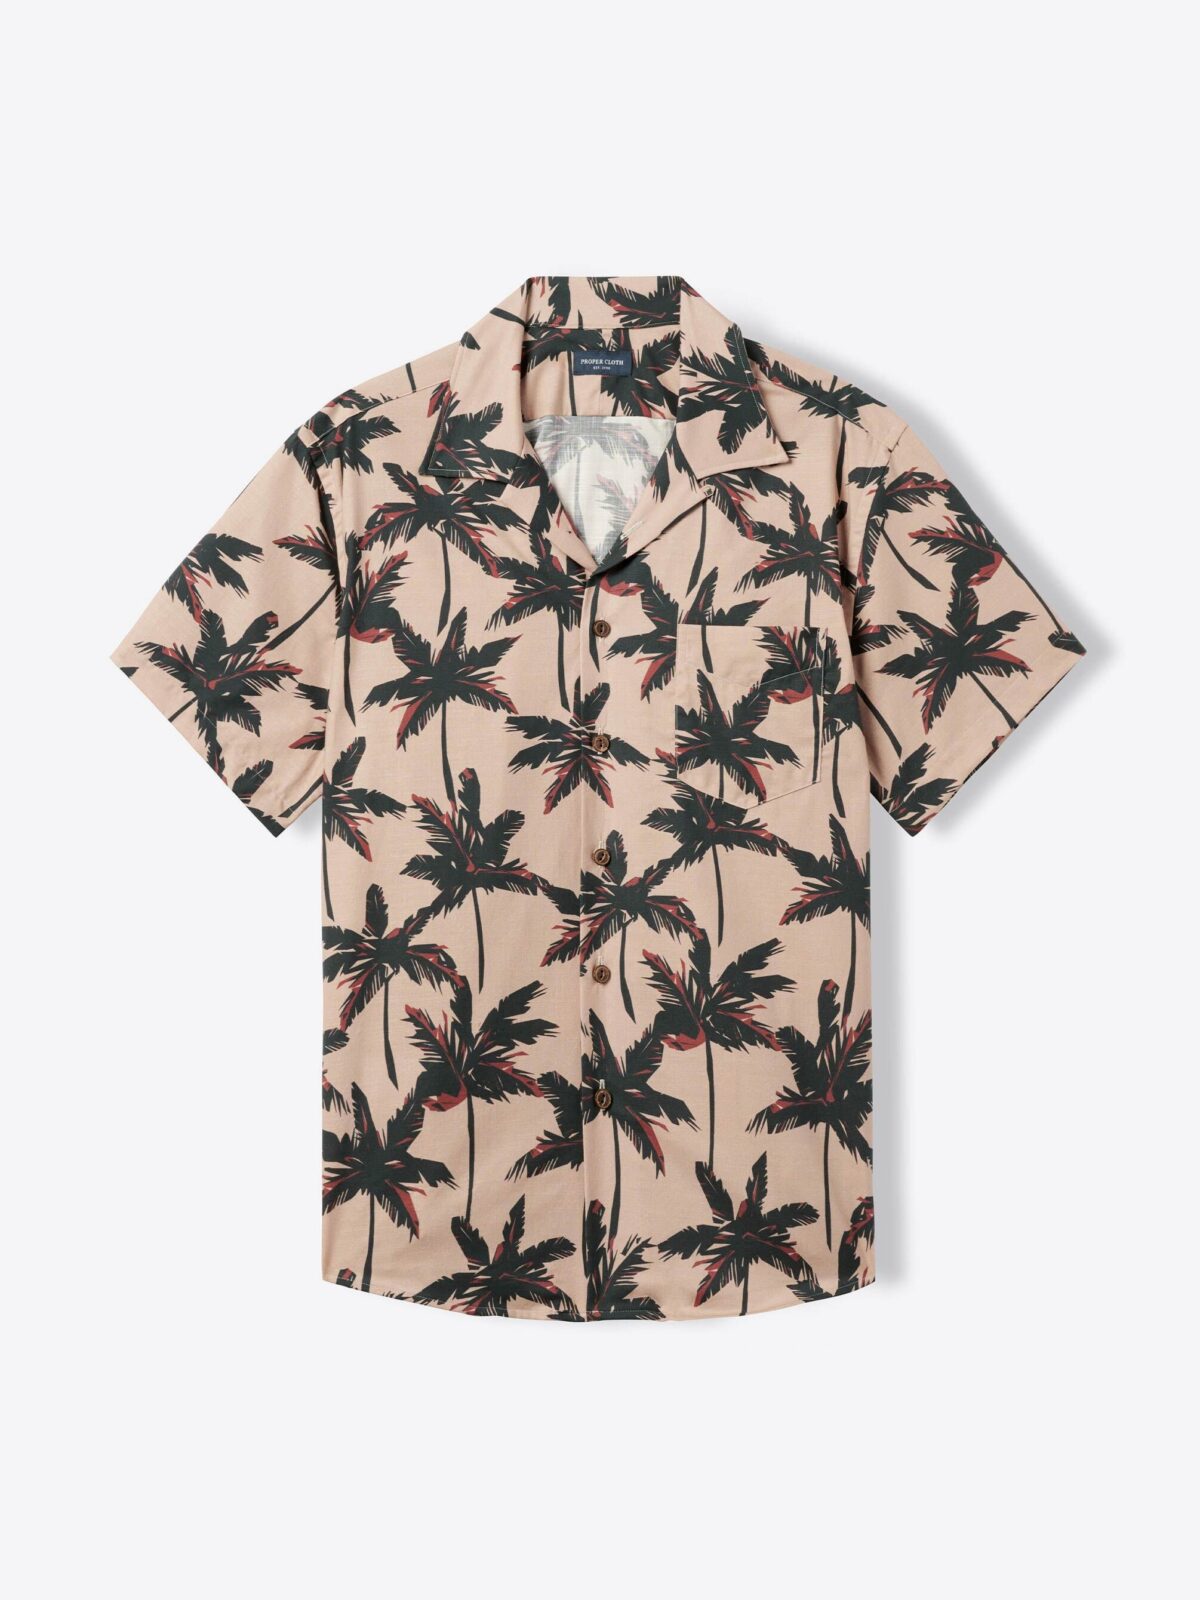 Albiate Beige Abstract Palm Print Shirt by Proper Cloth